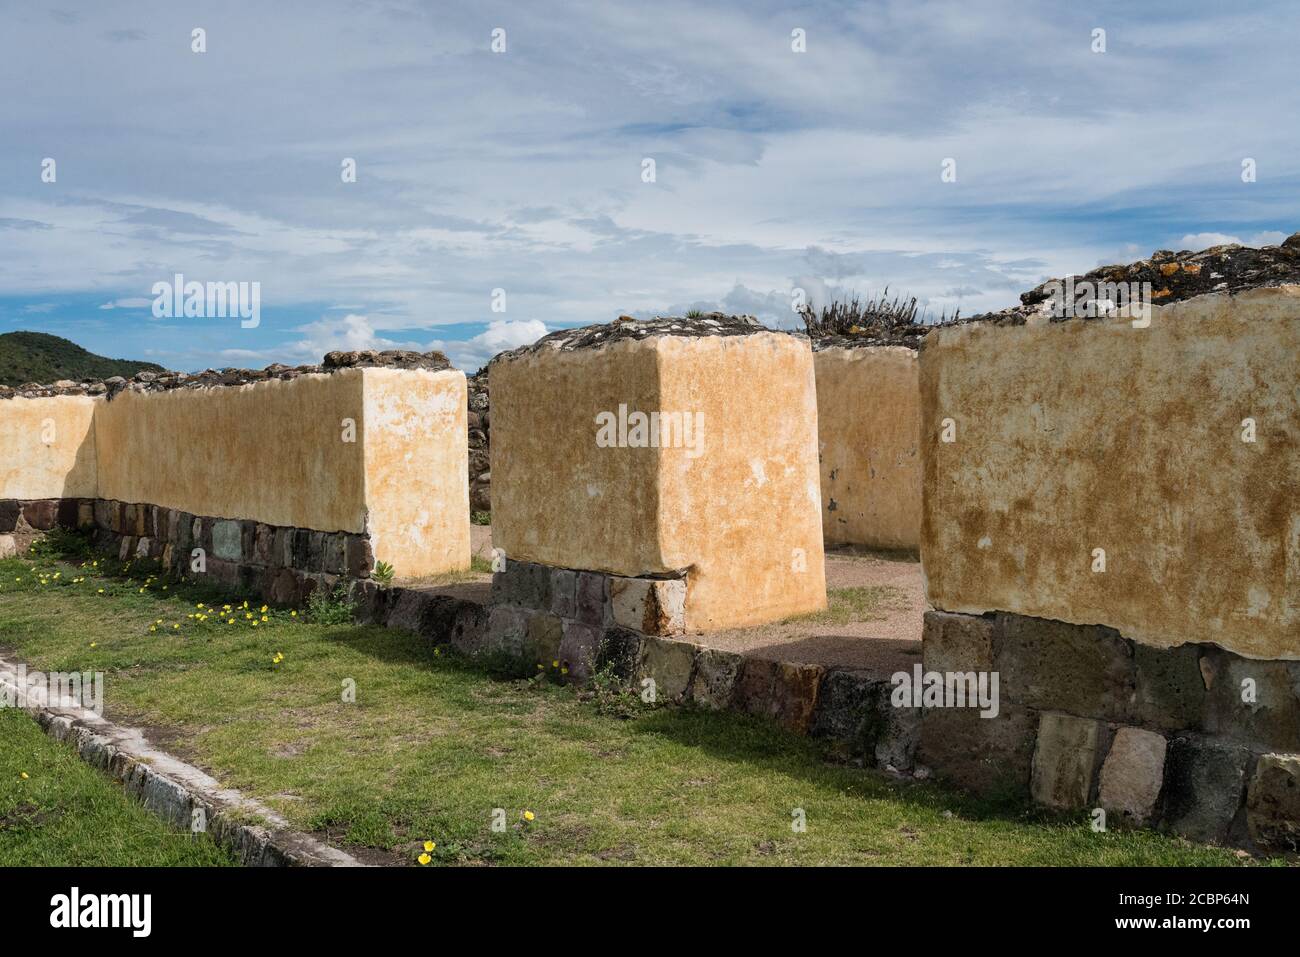 The Palace of the 6 Patios was housing for the elite of Yagul and was built around six grassy patios.  The walls were covered with stucco and painted. Stock Photo